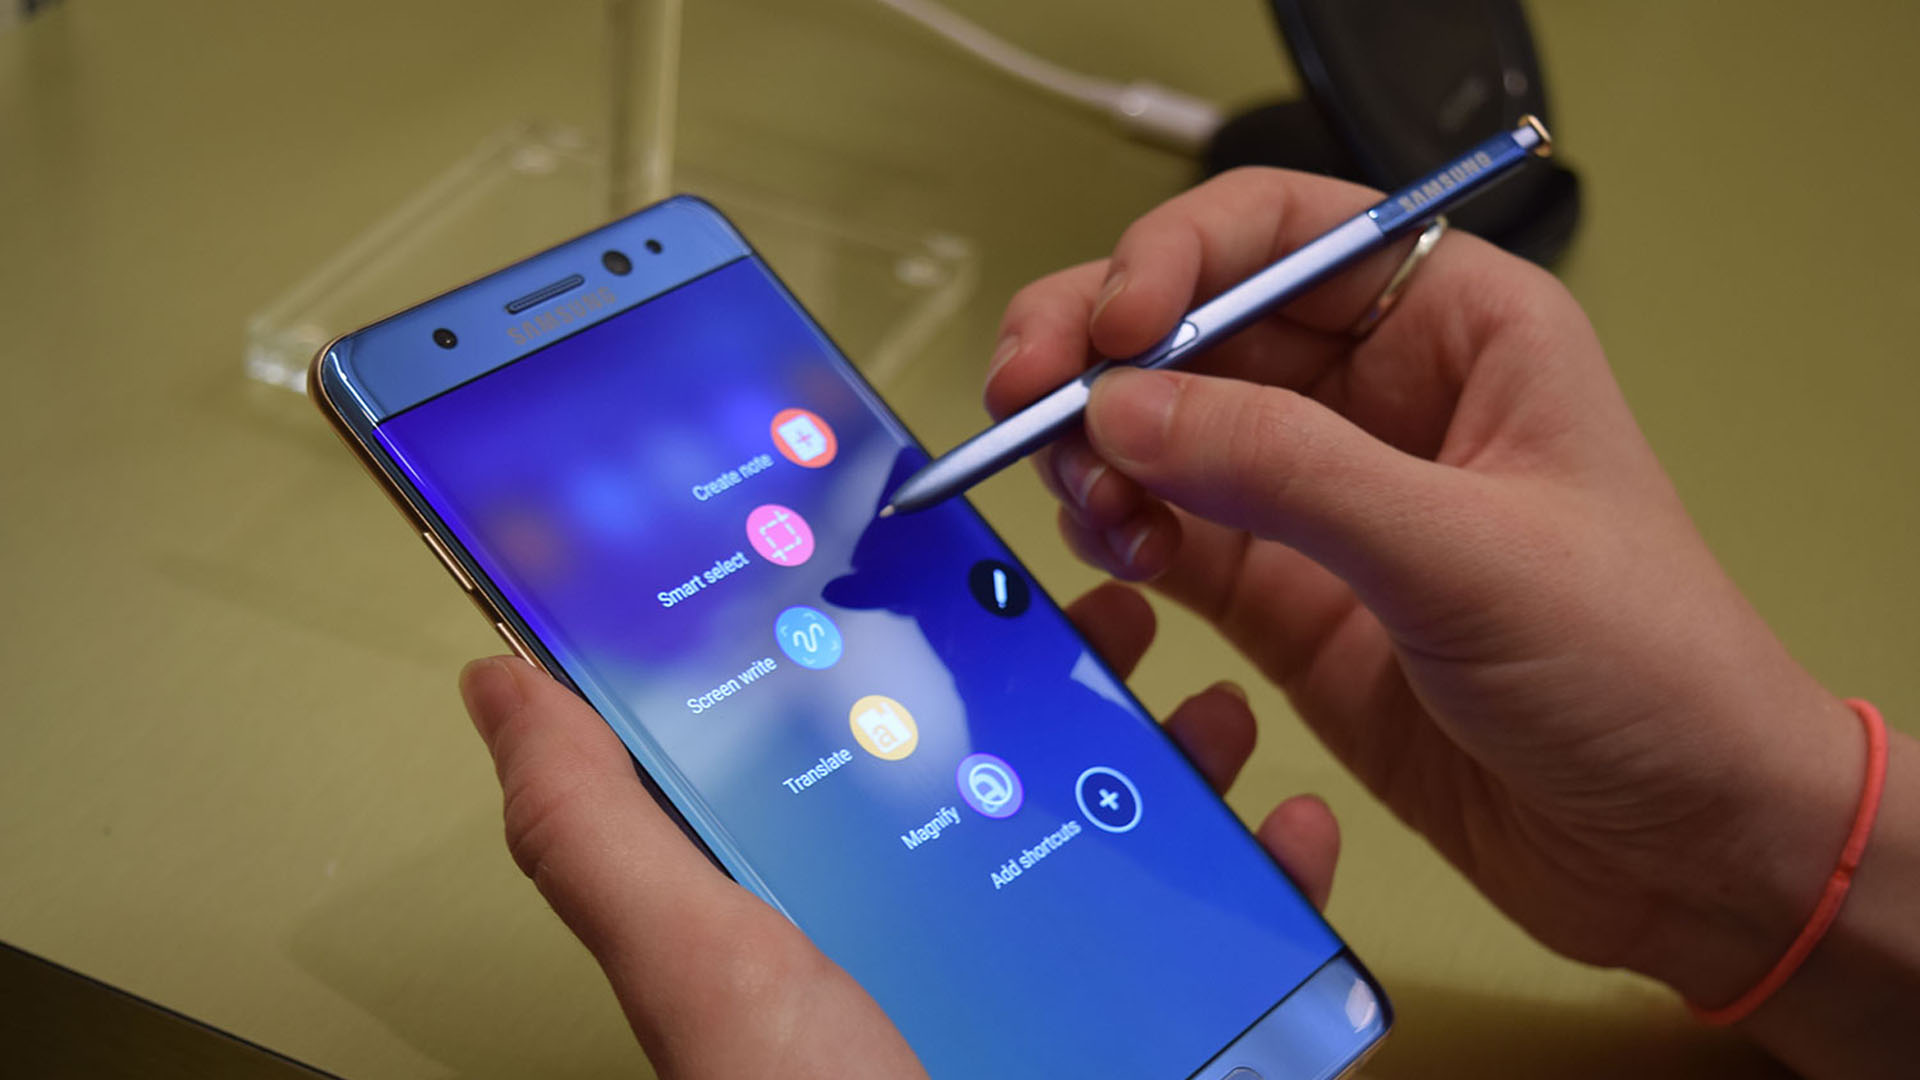 Samsung Note 7. Самсунг галакси ноут 7. Note 7 note 11